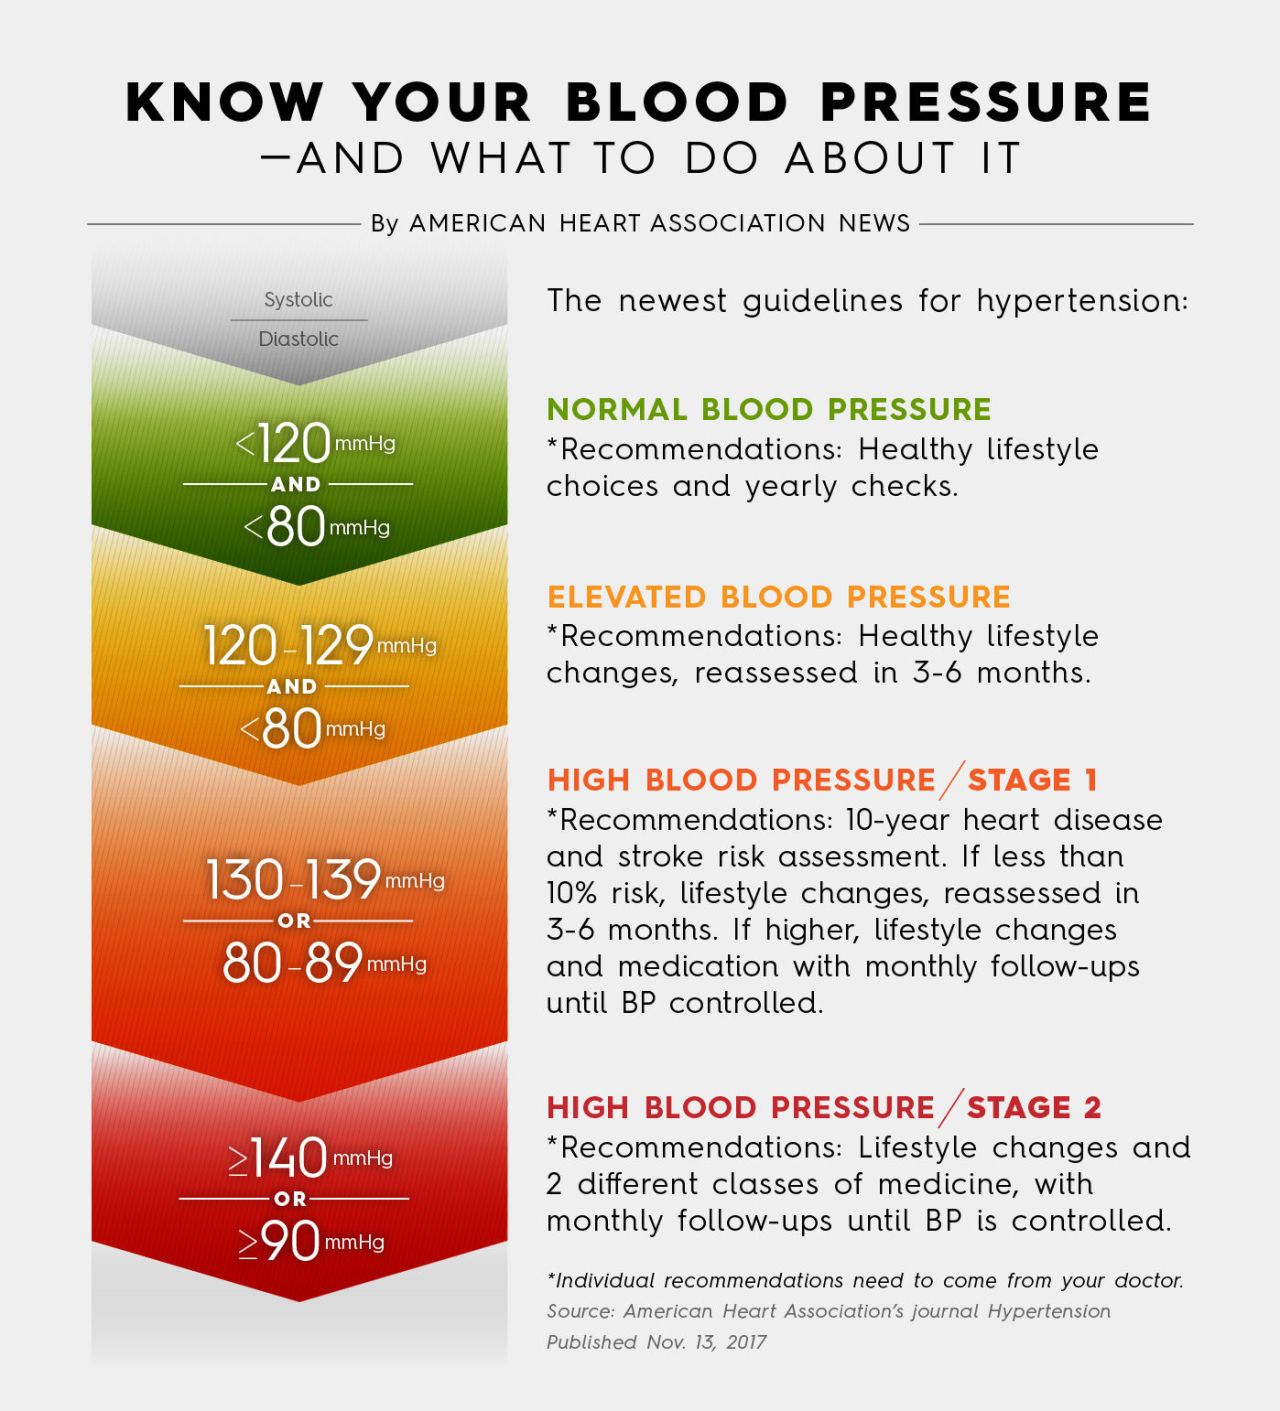 New Blood Pressure Guidelines Classify 30 Million More ...